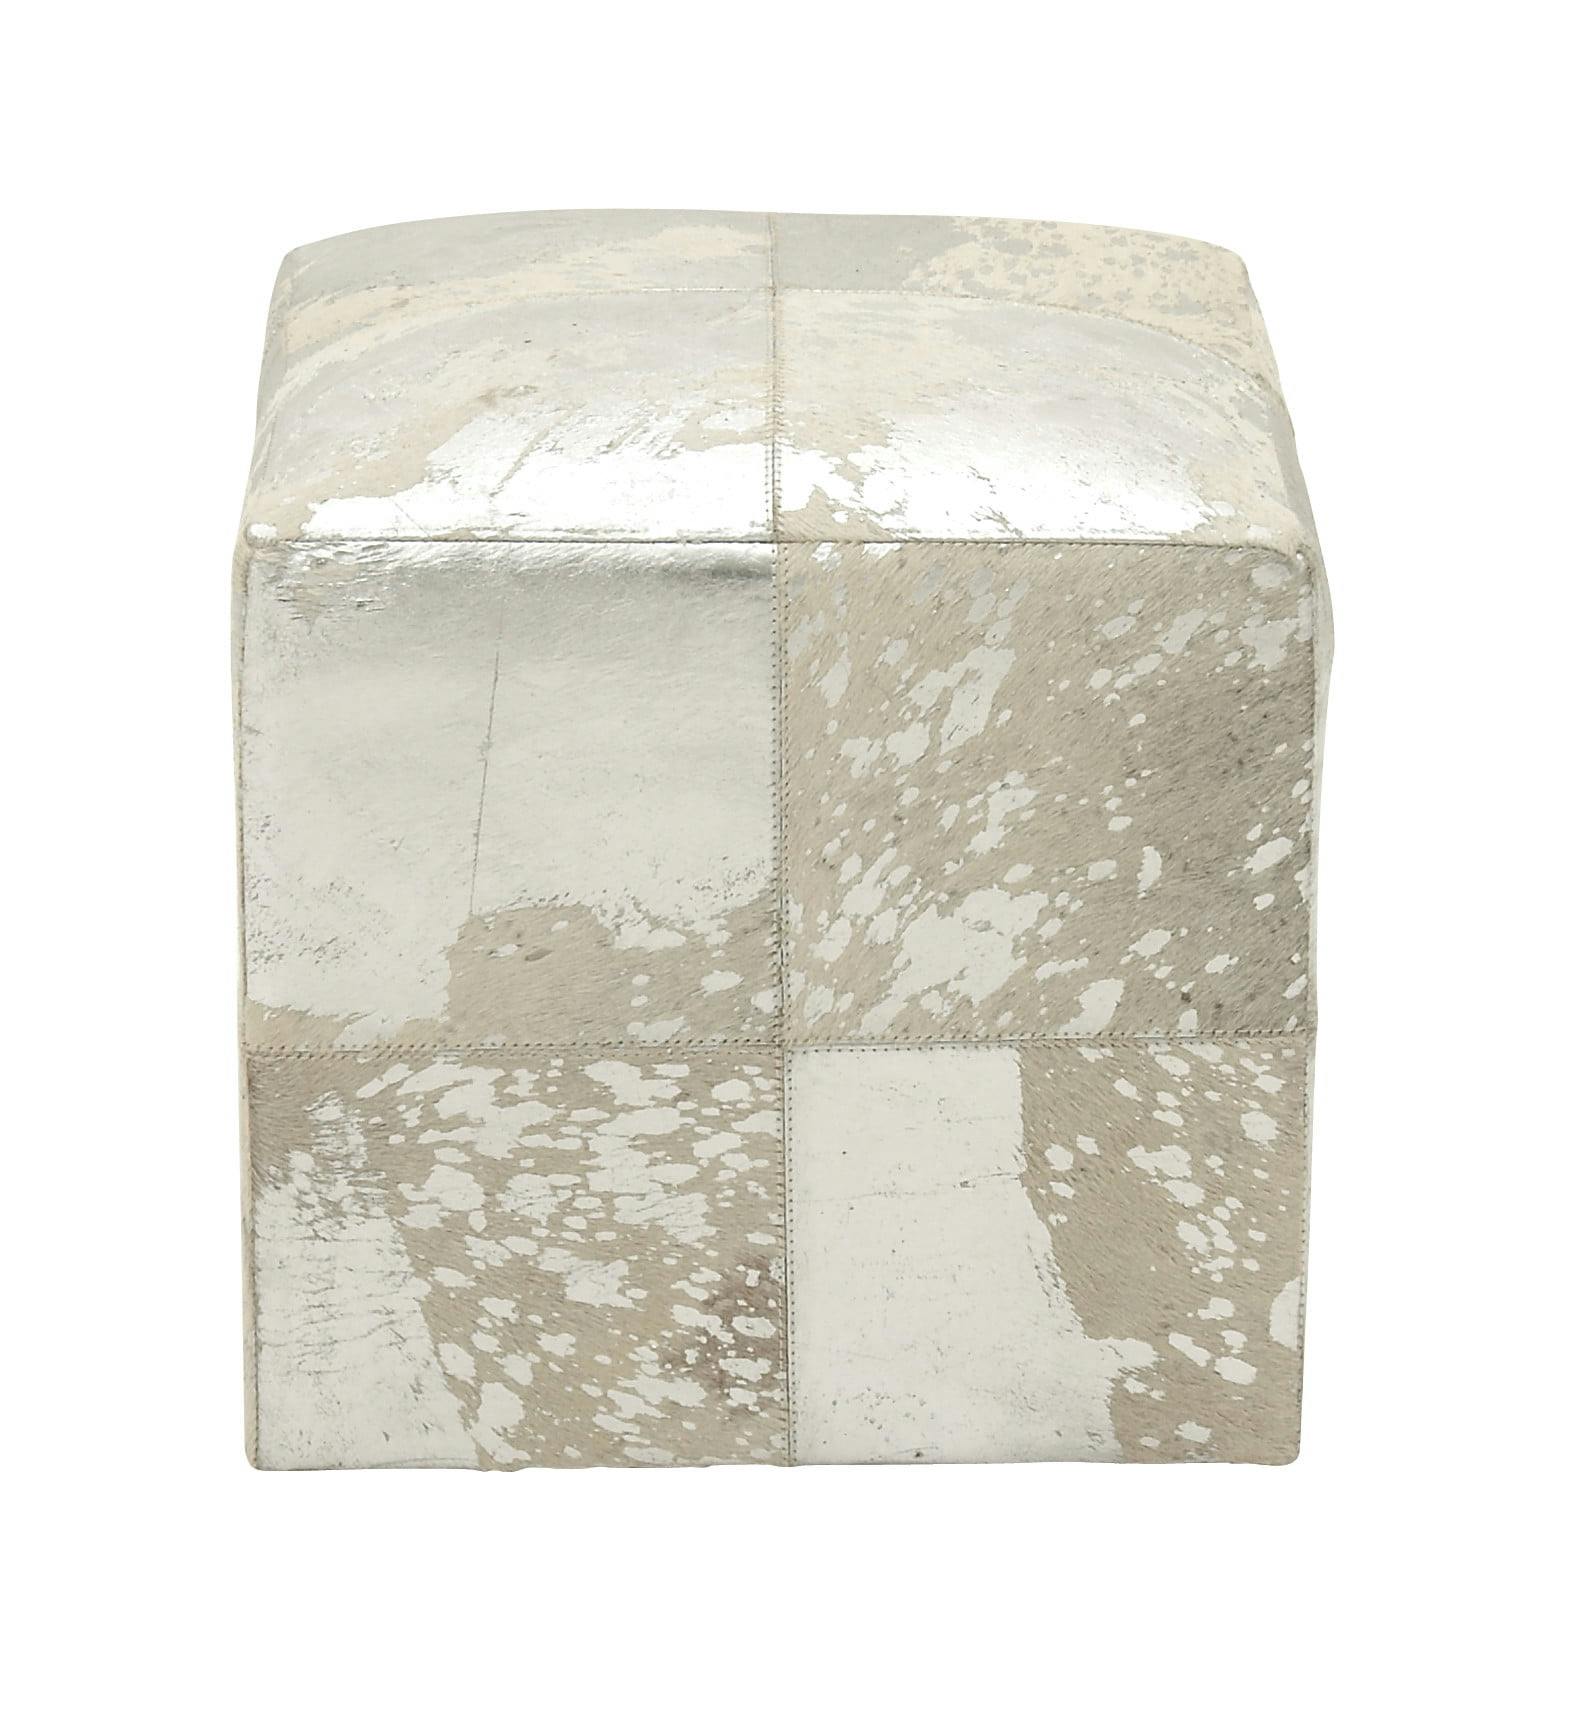 Elegance Unleashed White Leather Pouf with Silver Accents, 16"x17"